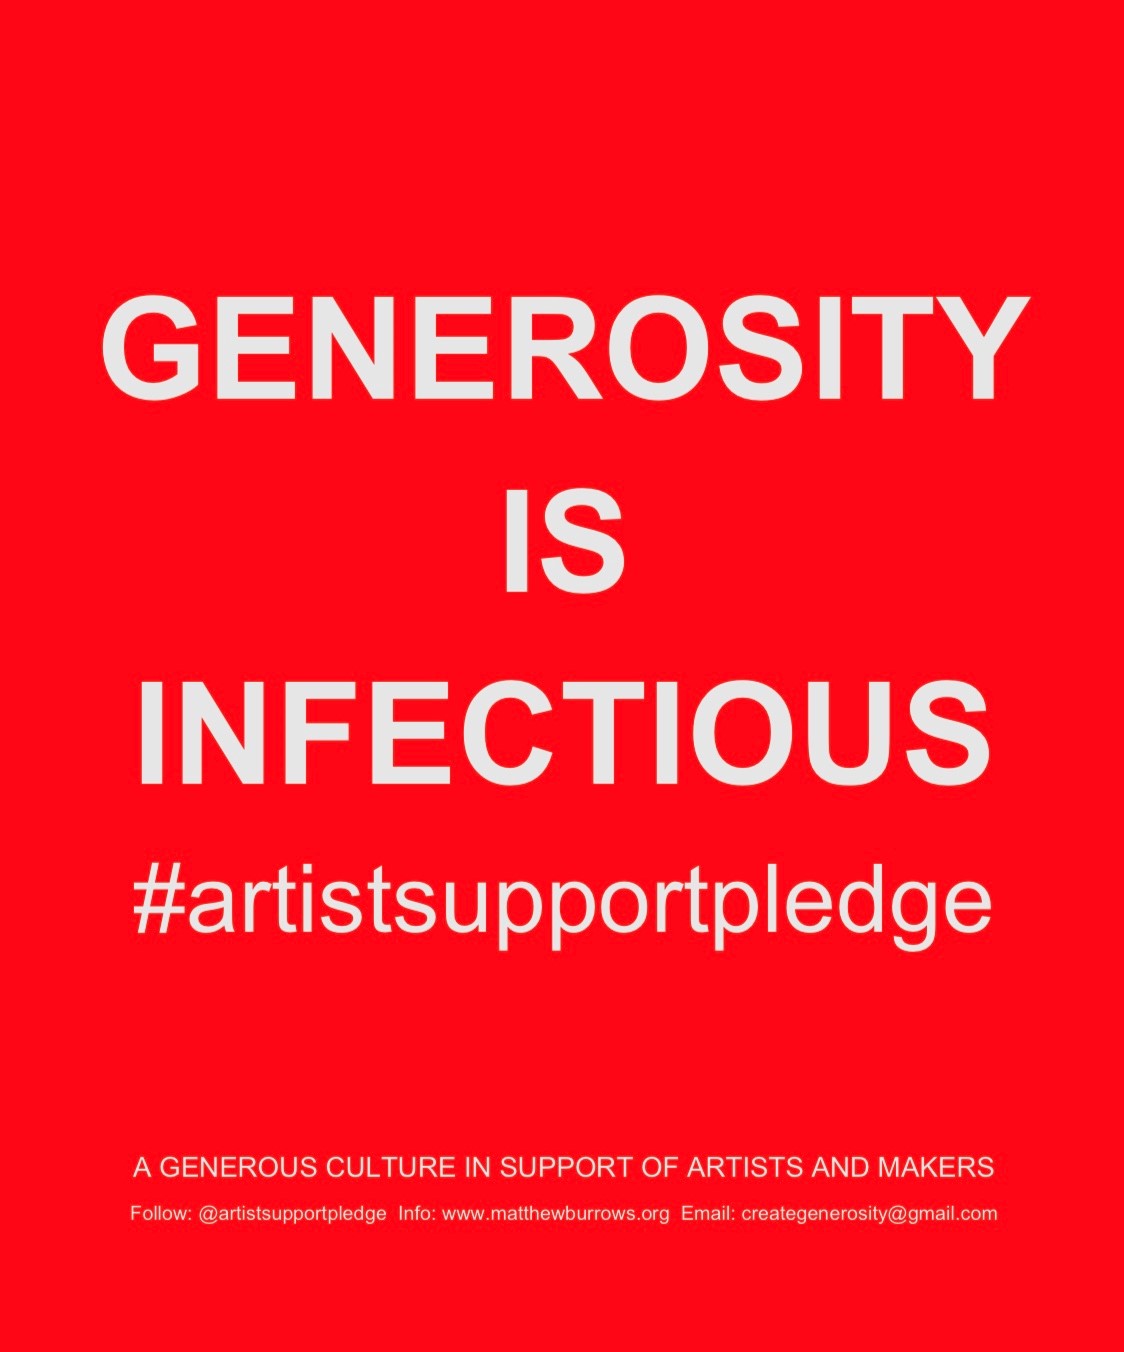 The #ArtistSupportPledge is Contagious. So Pass it On.